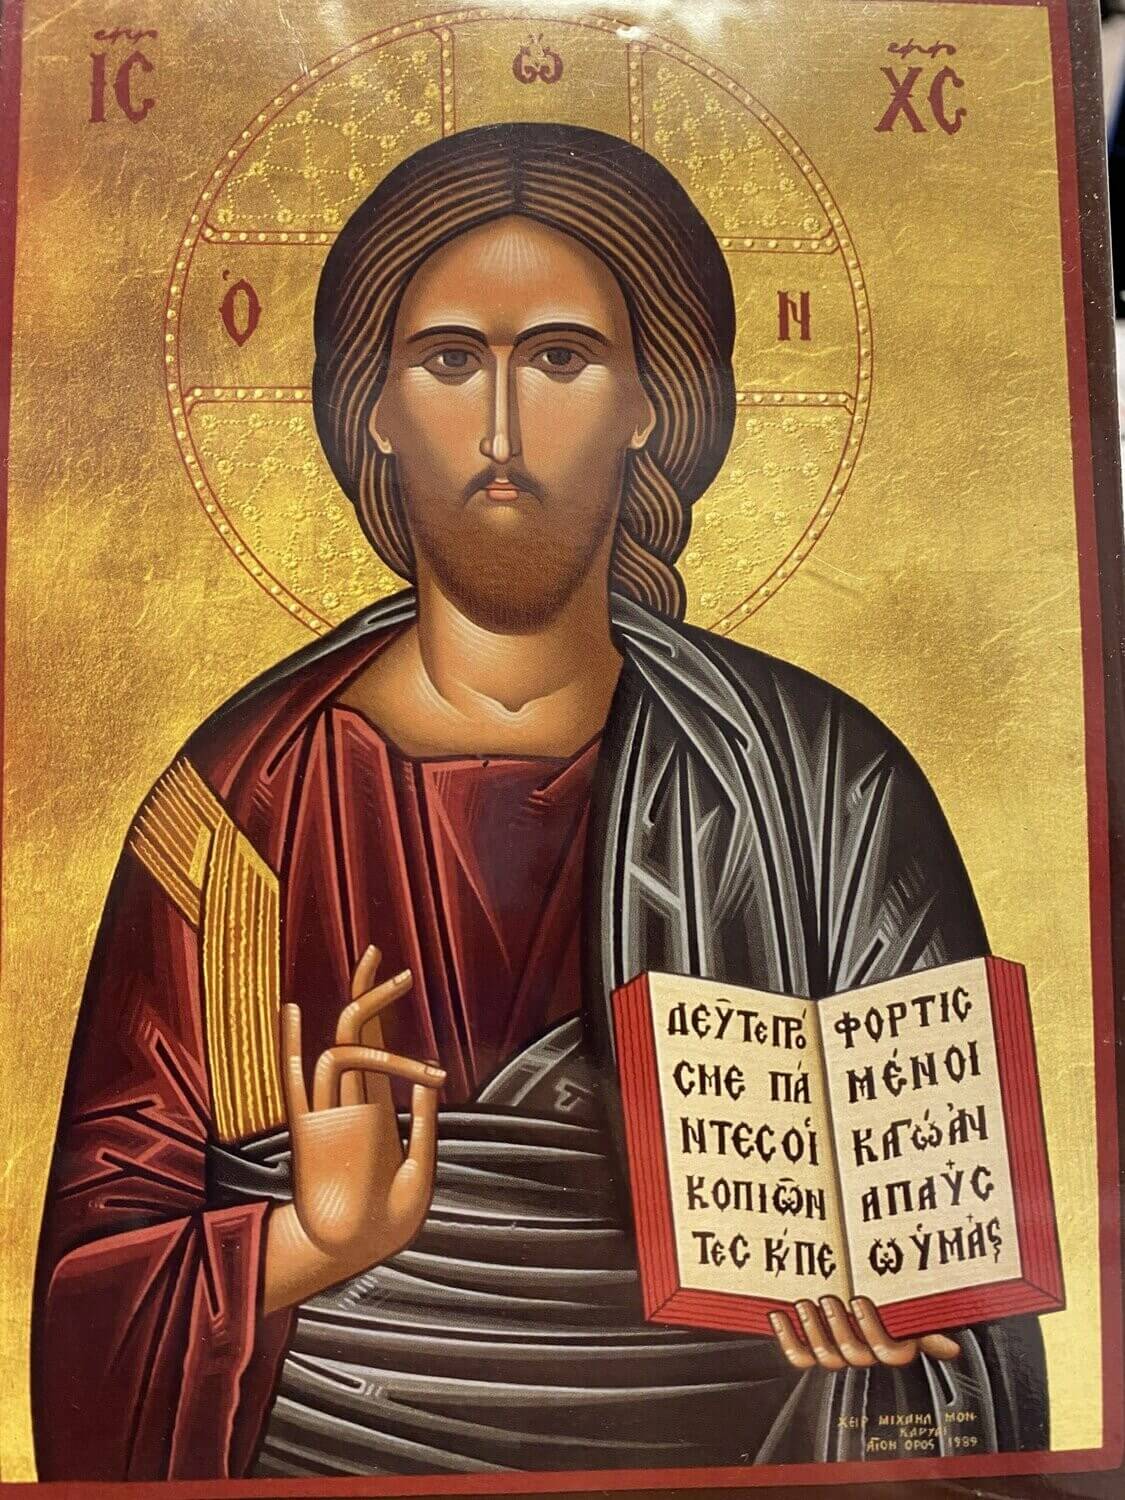 Jesus with Bible Icon